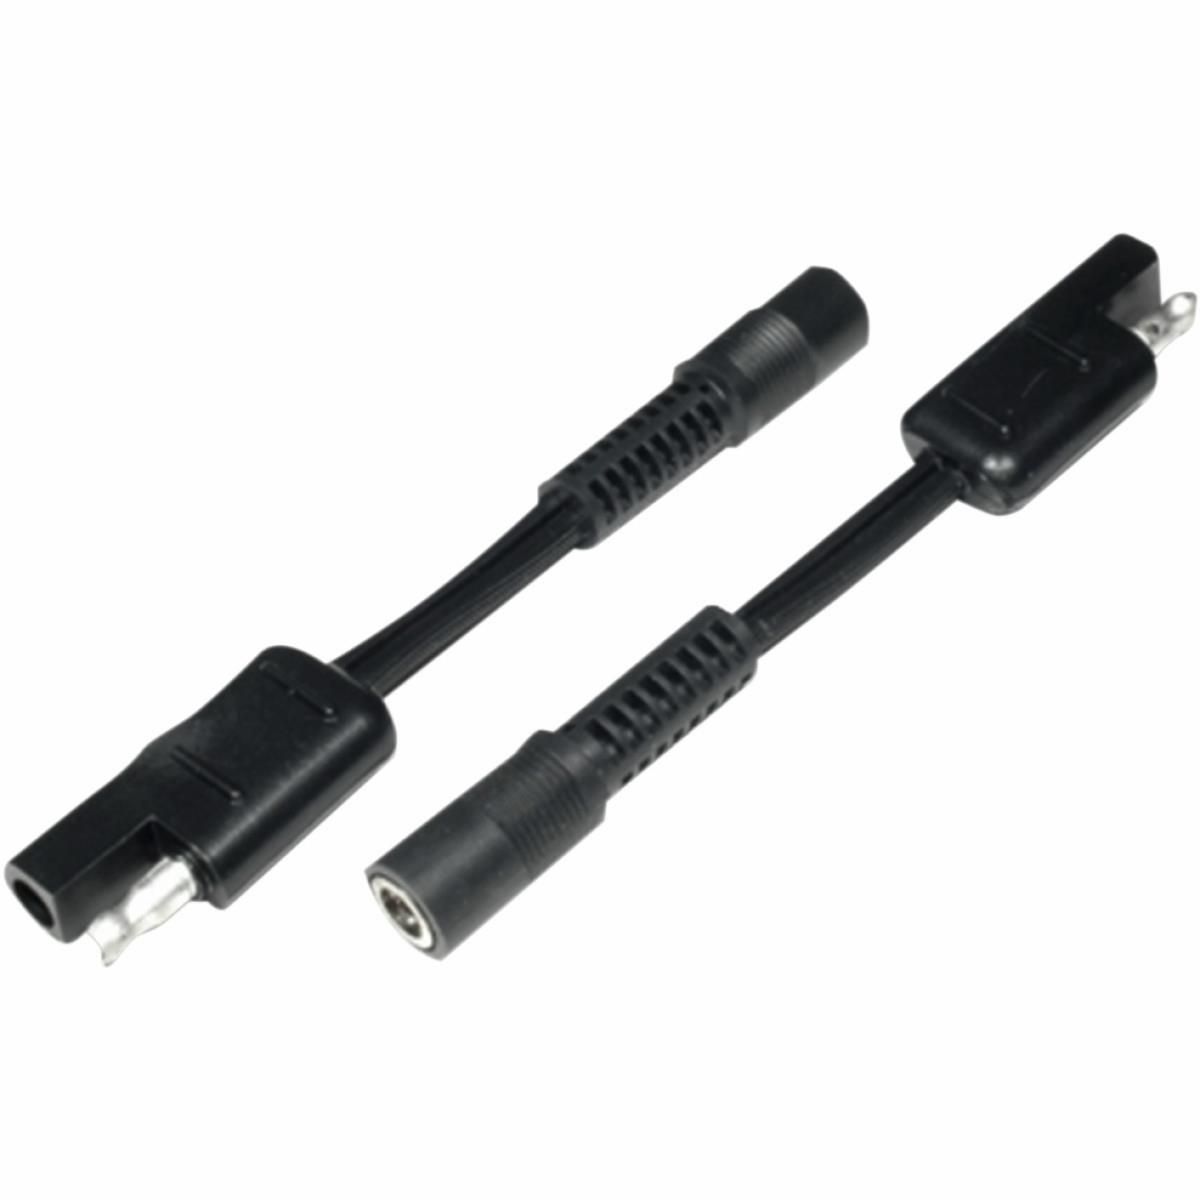 29W4-ATOMIC-SKIN-PAC-039 SAE to Coax Female Cable - 4in. 